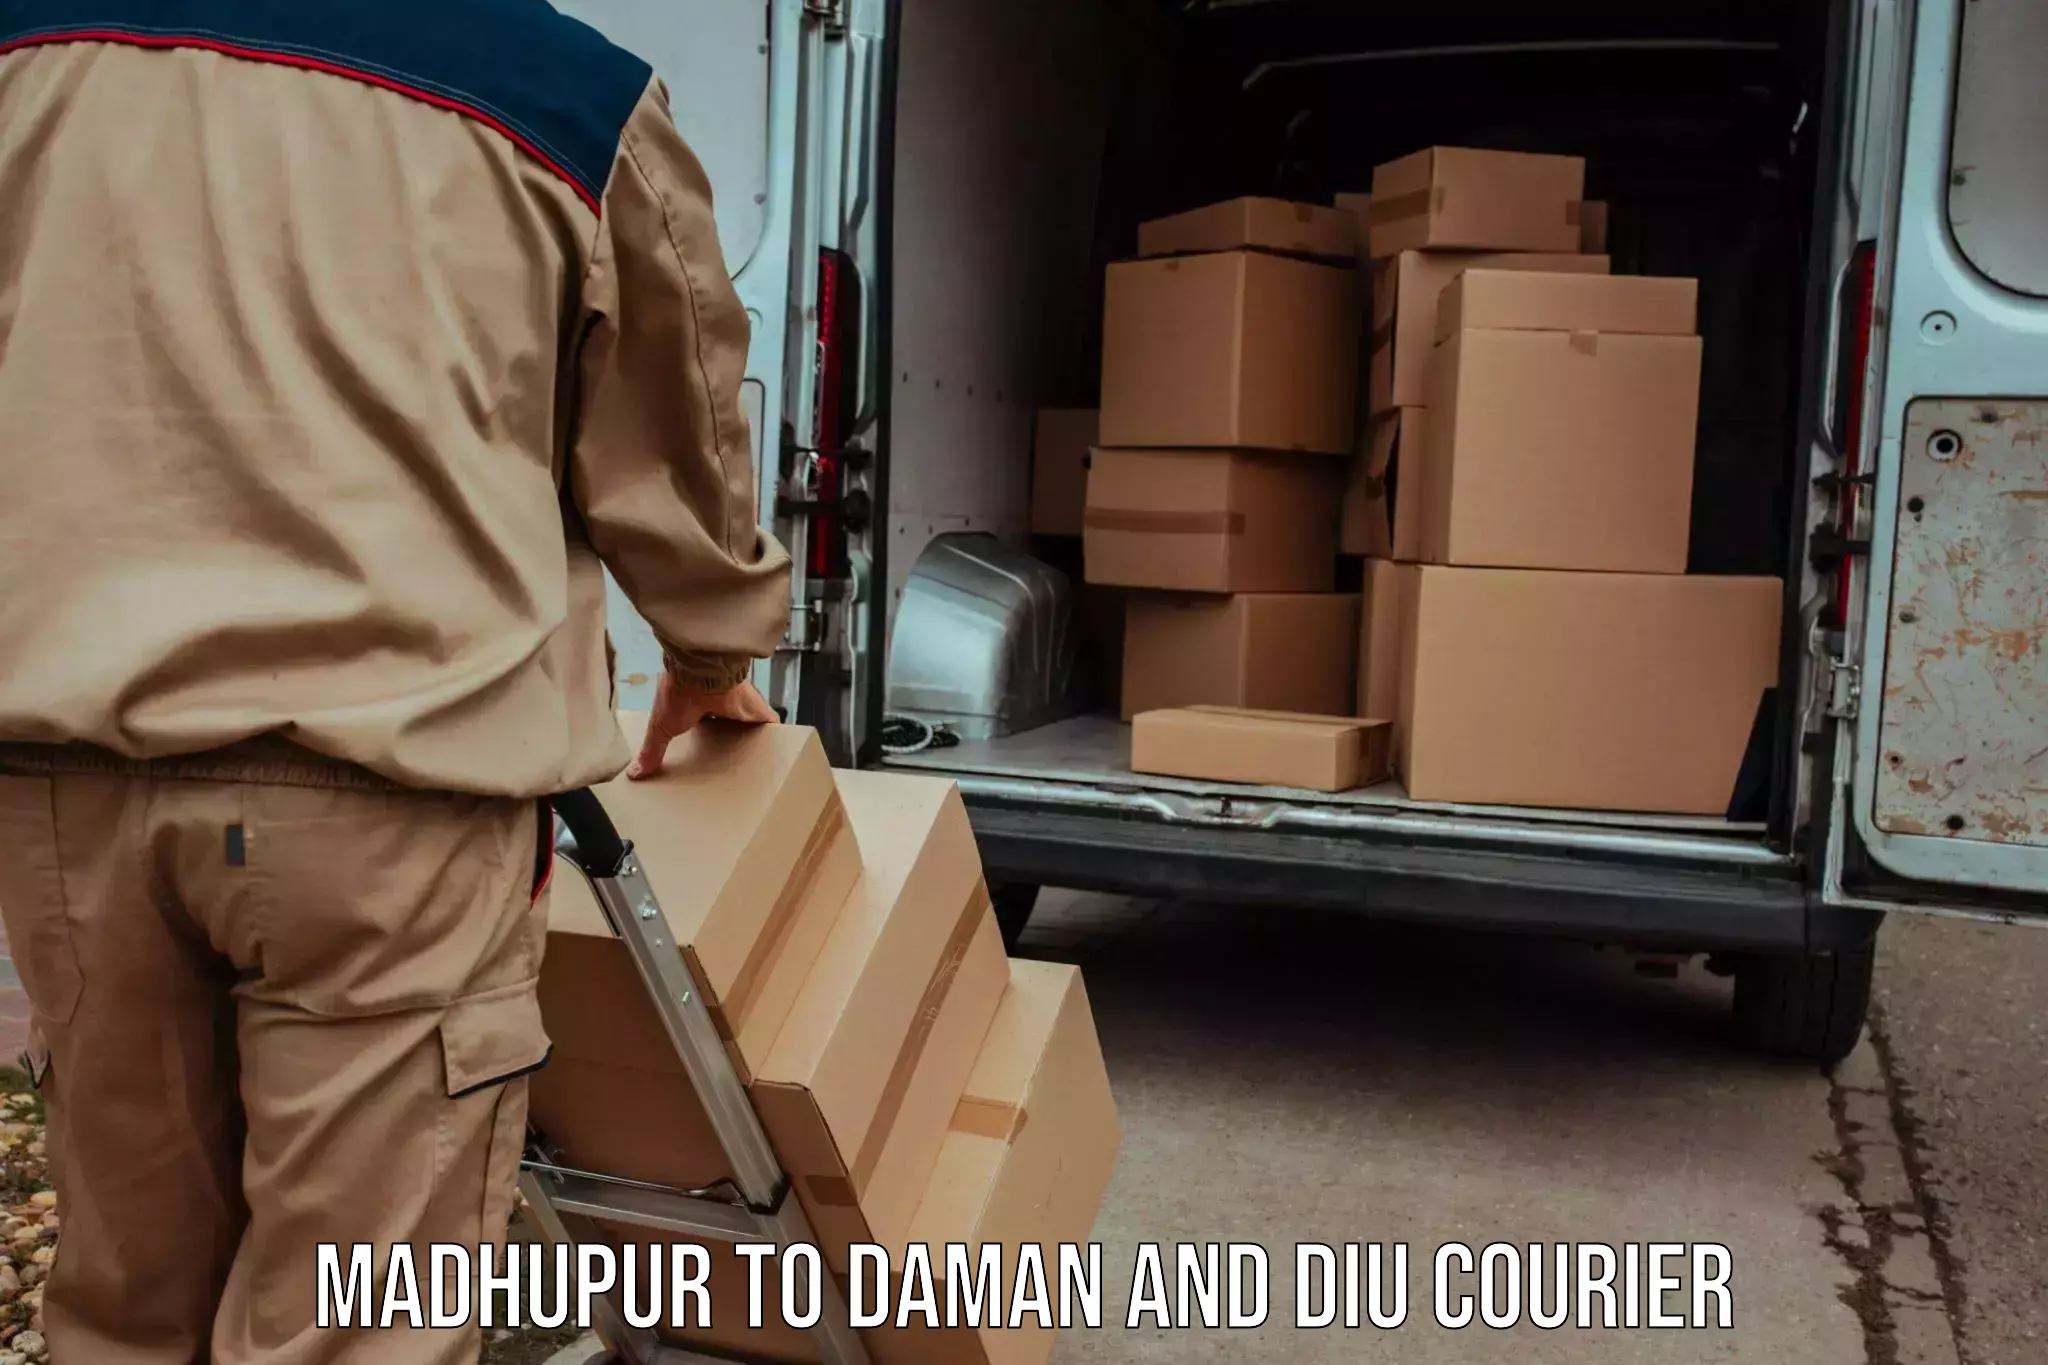 Next-day delivery options in Madhupur to Daman and Diu